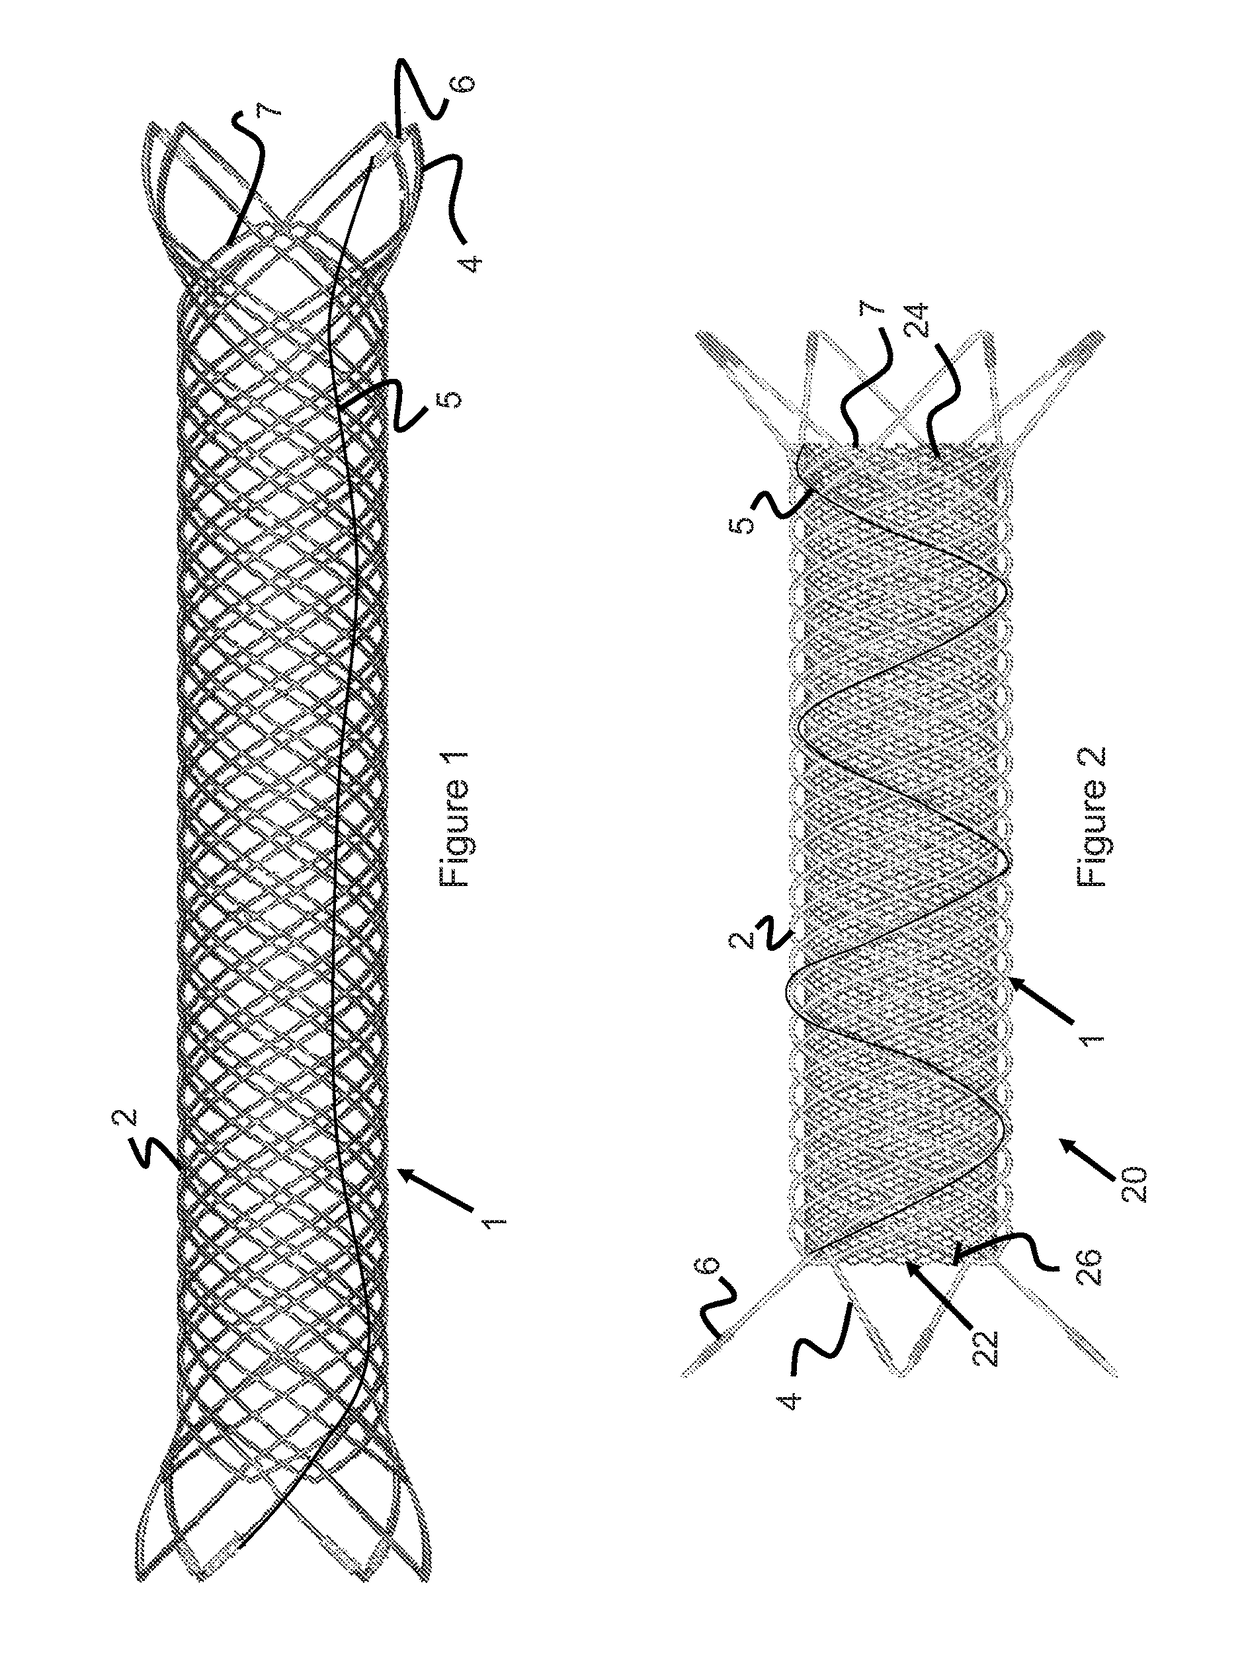 Implant Retention, Detachment, And Delivery System